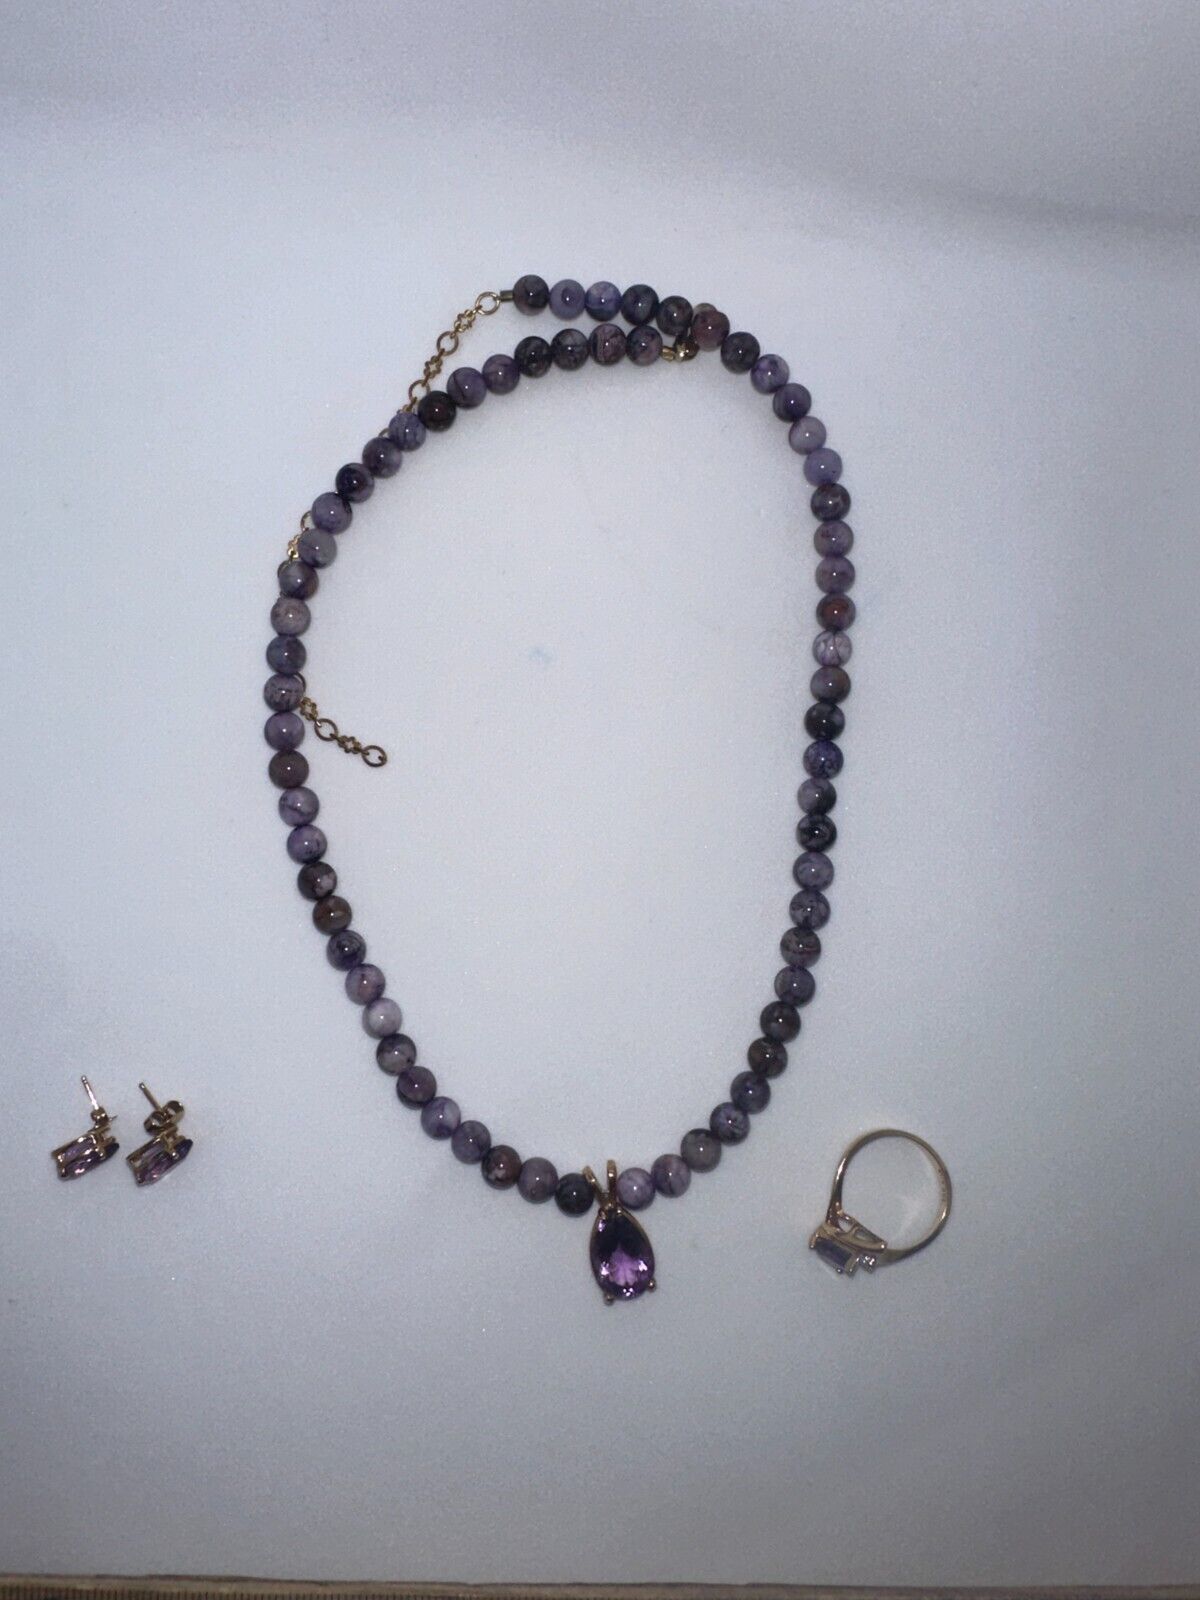 Stunning Purple Amethyst Jewelry Set - Necklace, 14k Gold Ring and Earrings